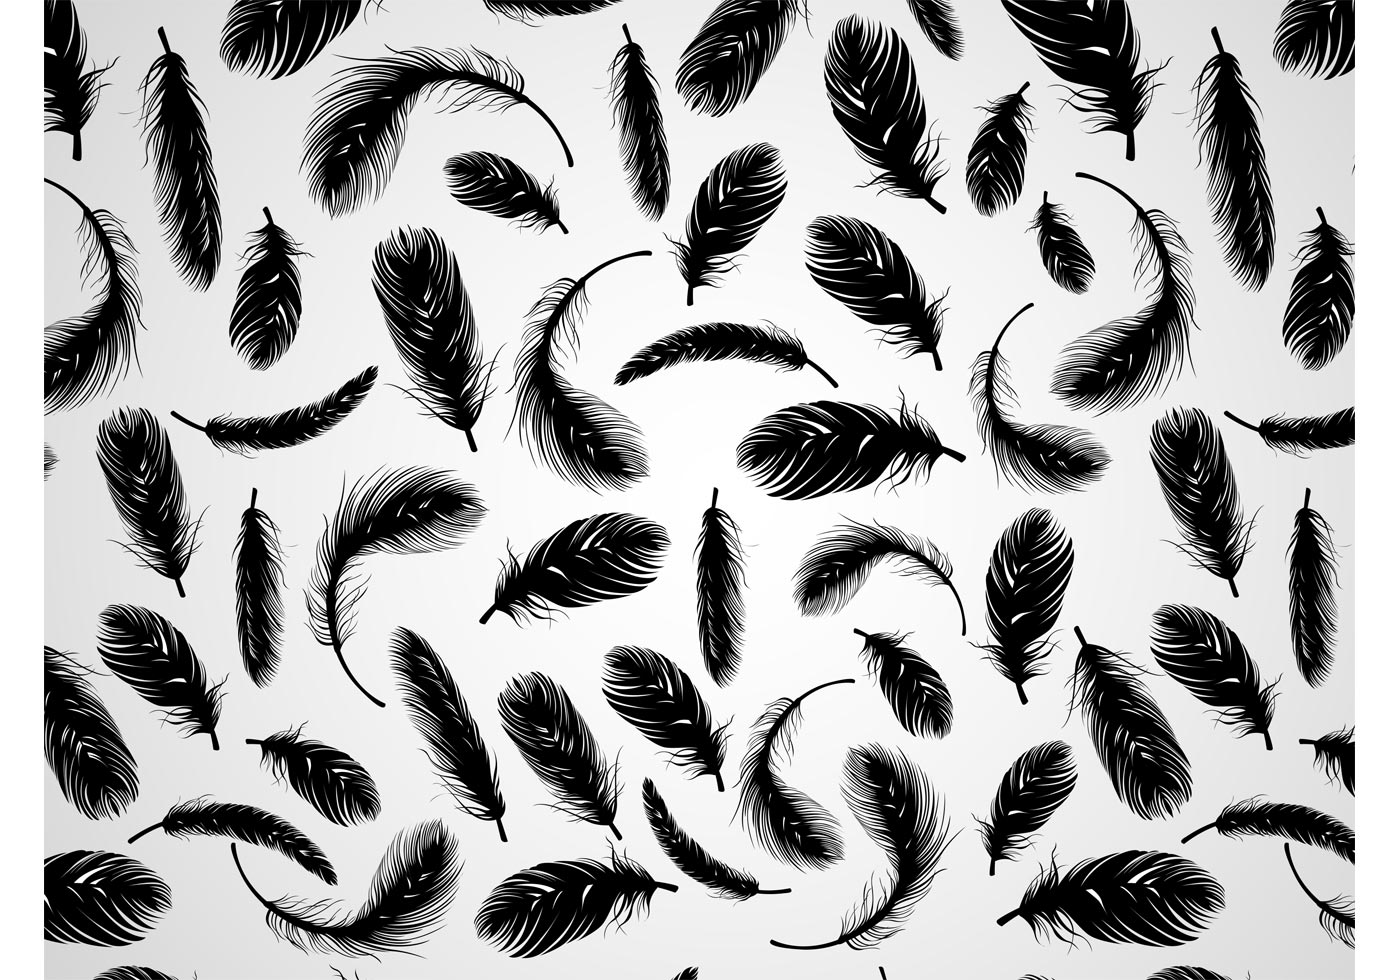 Download Feather Pattern Free Vector Art - (15308 Free Downloads)